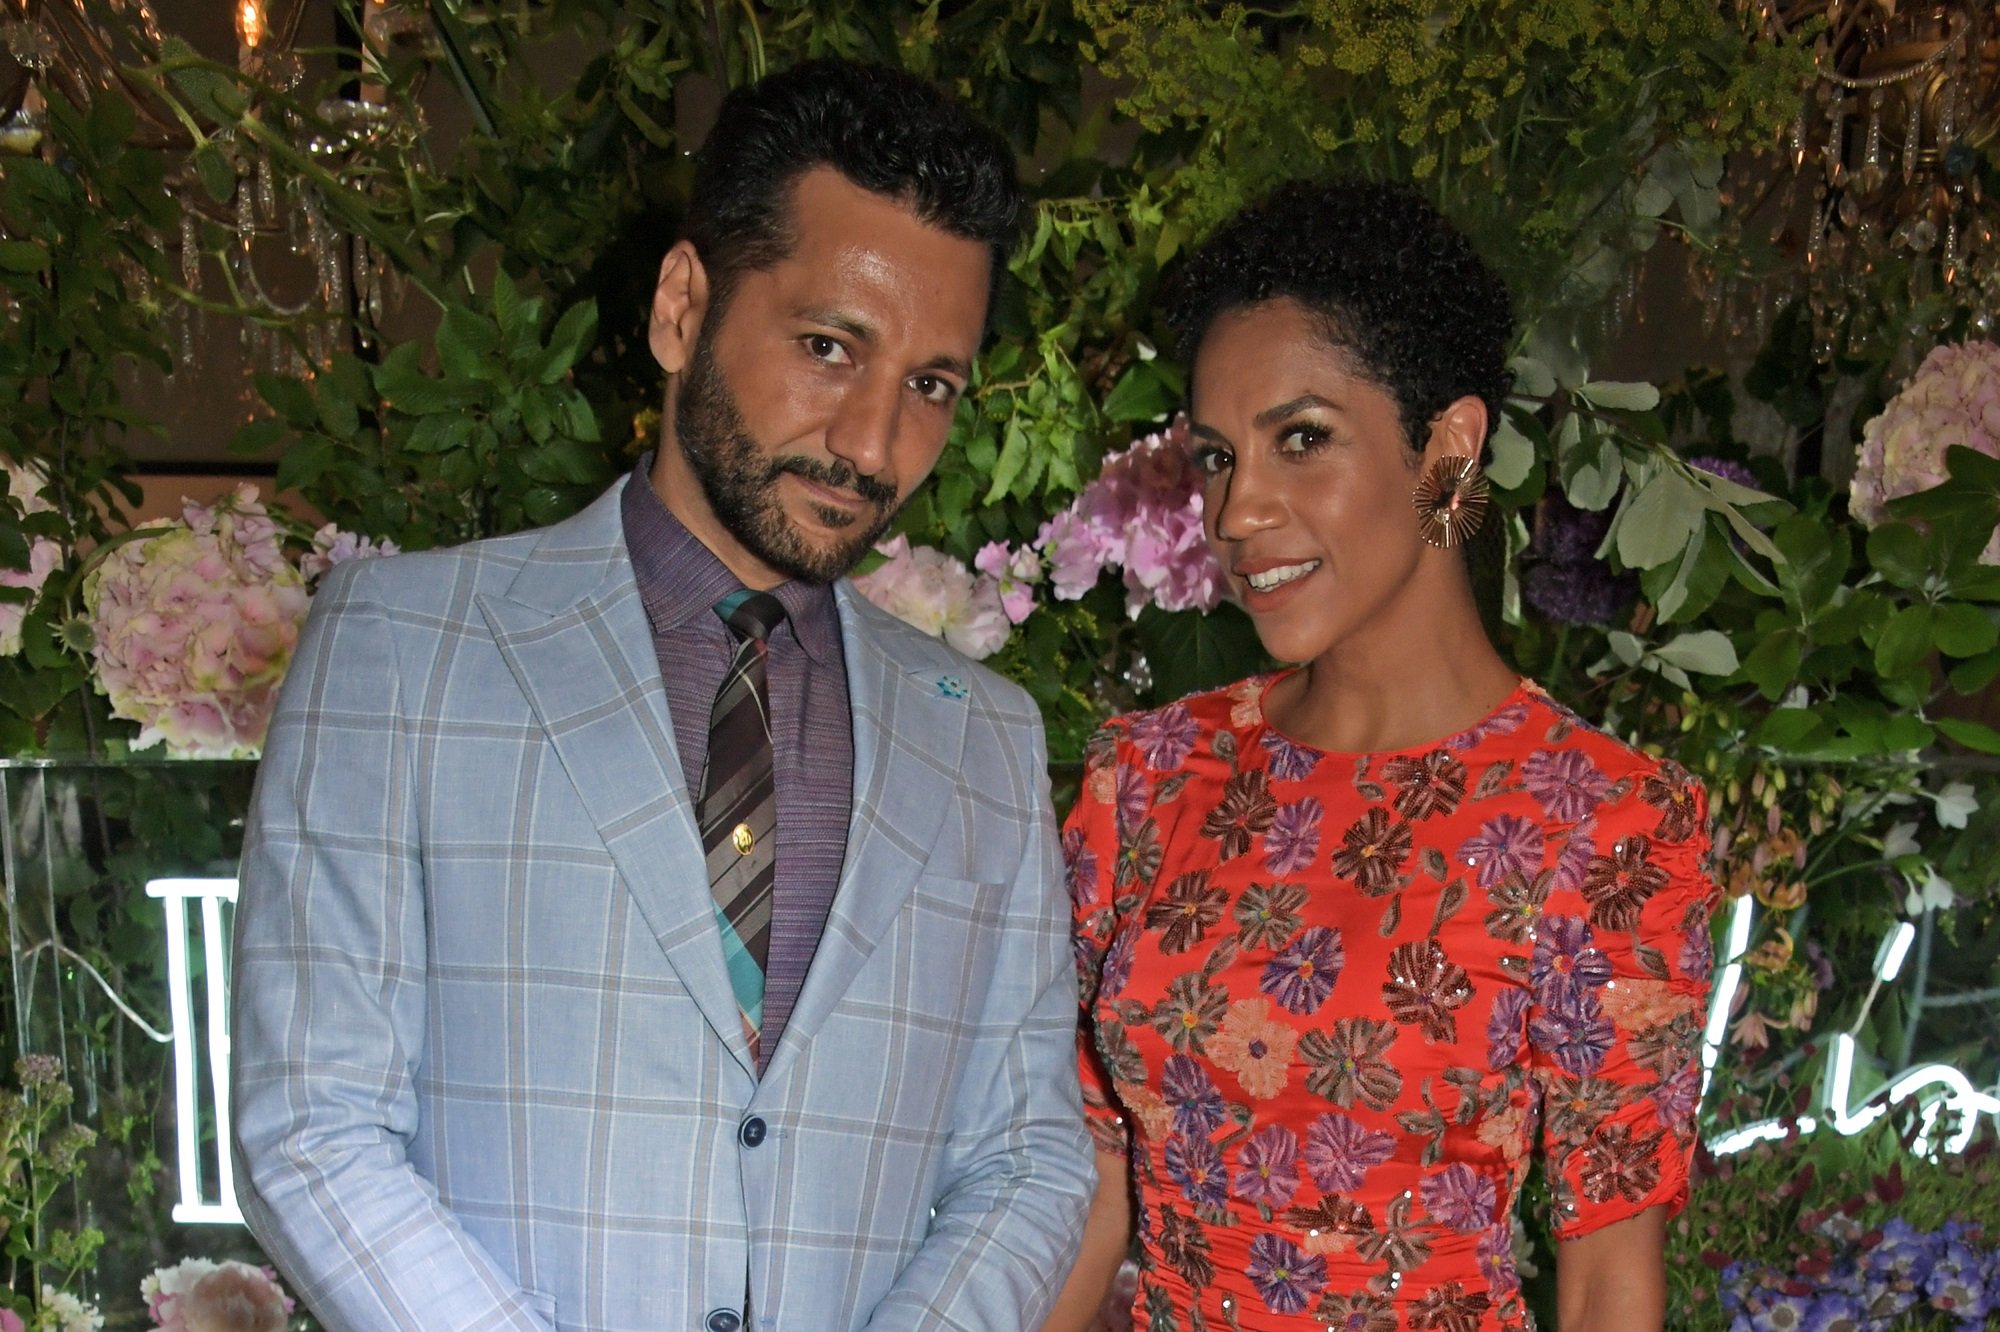 Cas Anvar and Dominique Tipper of The Expanse